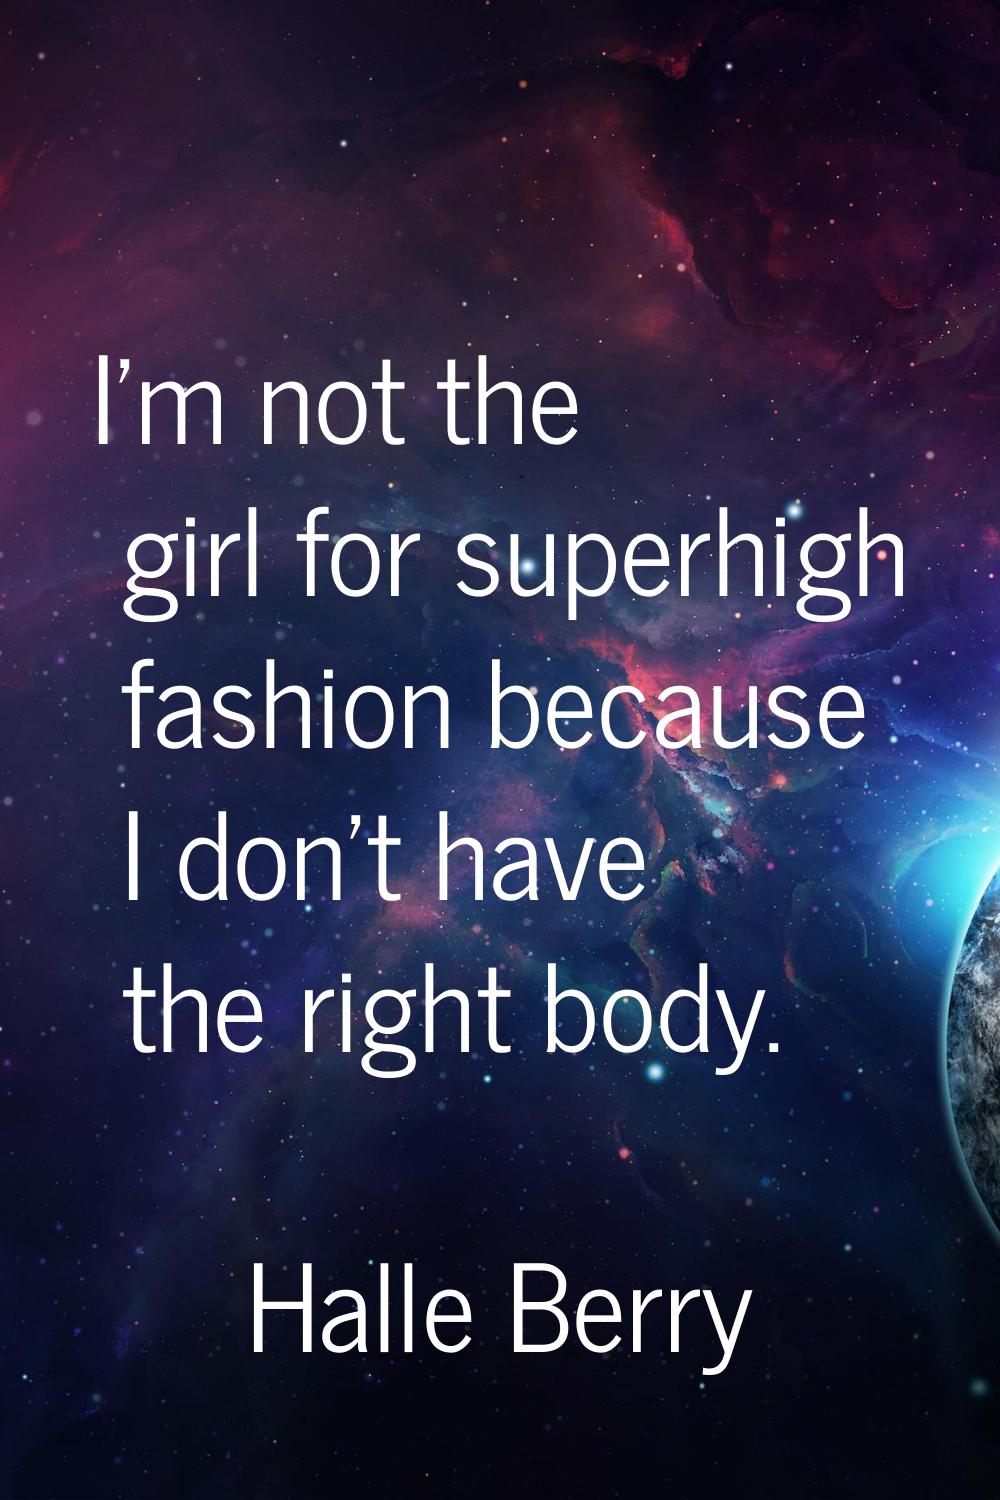 I'm not the girl for superhigh fashion because I don't have the right body.